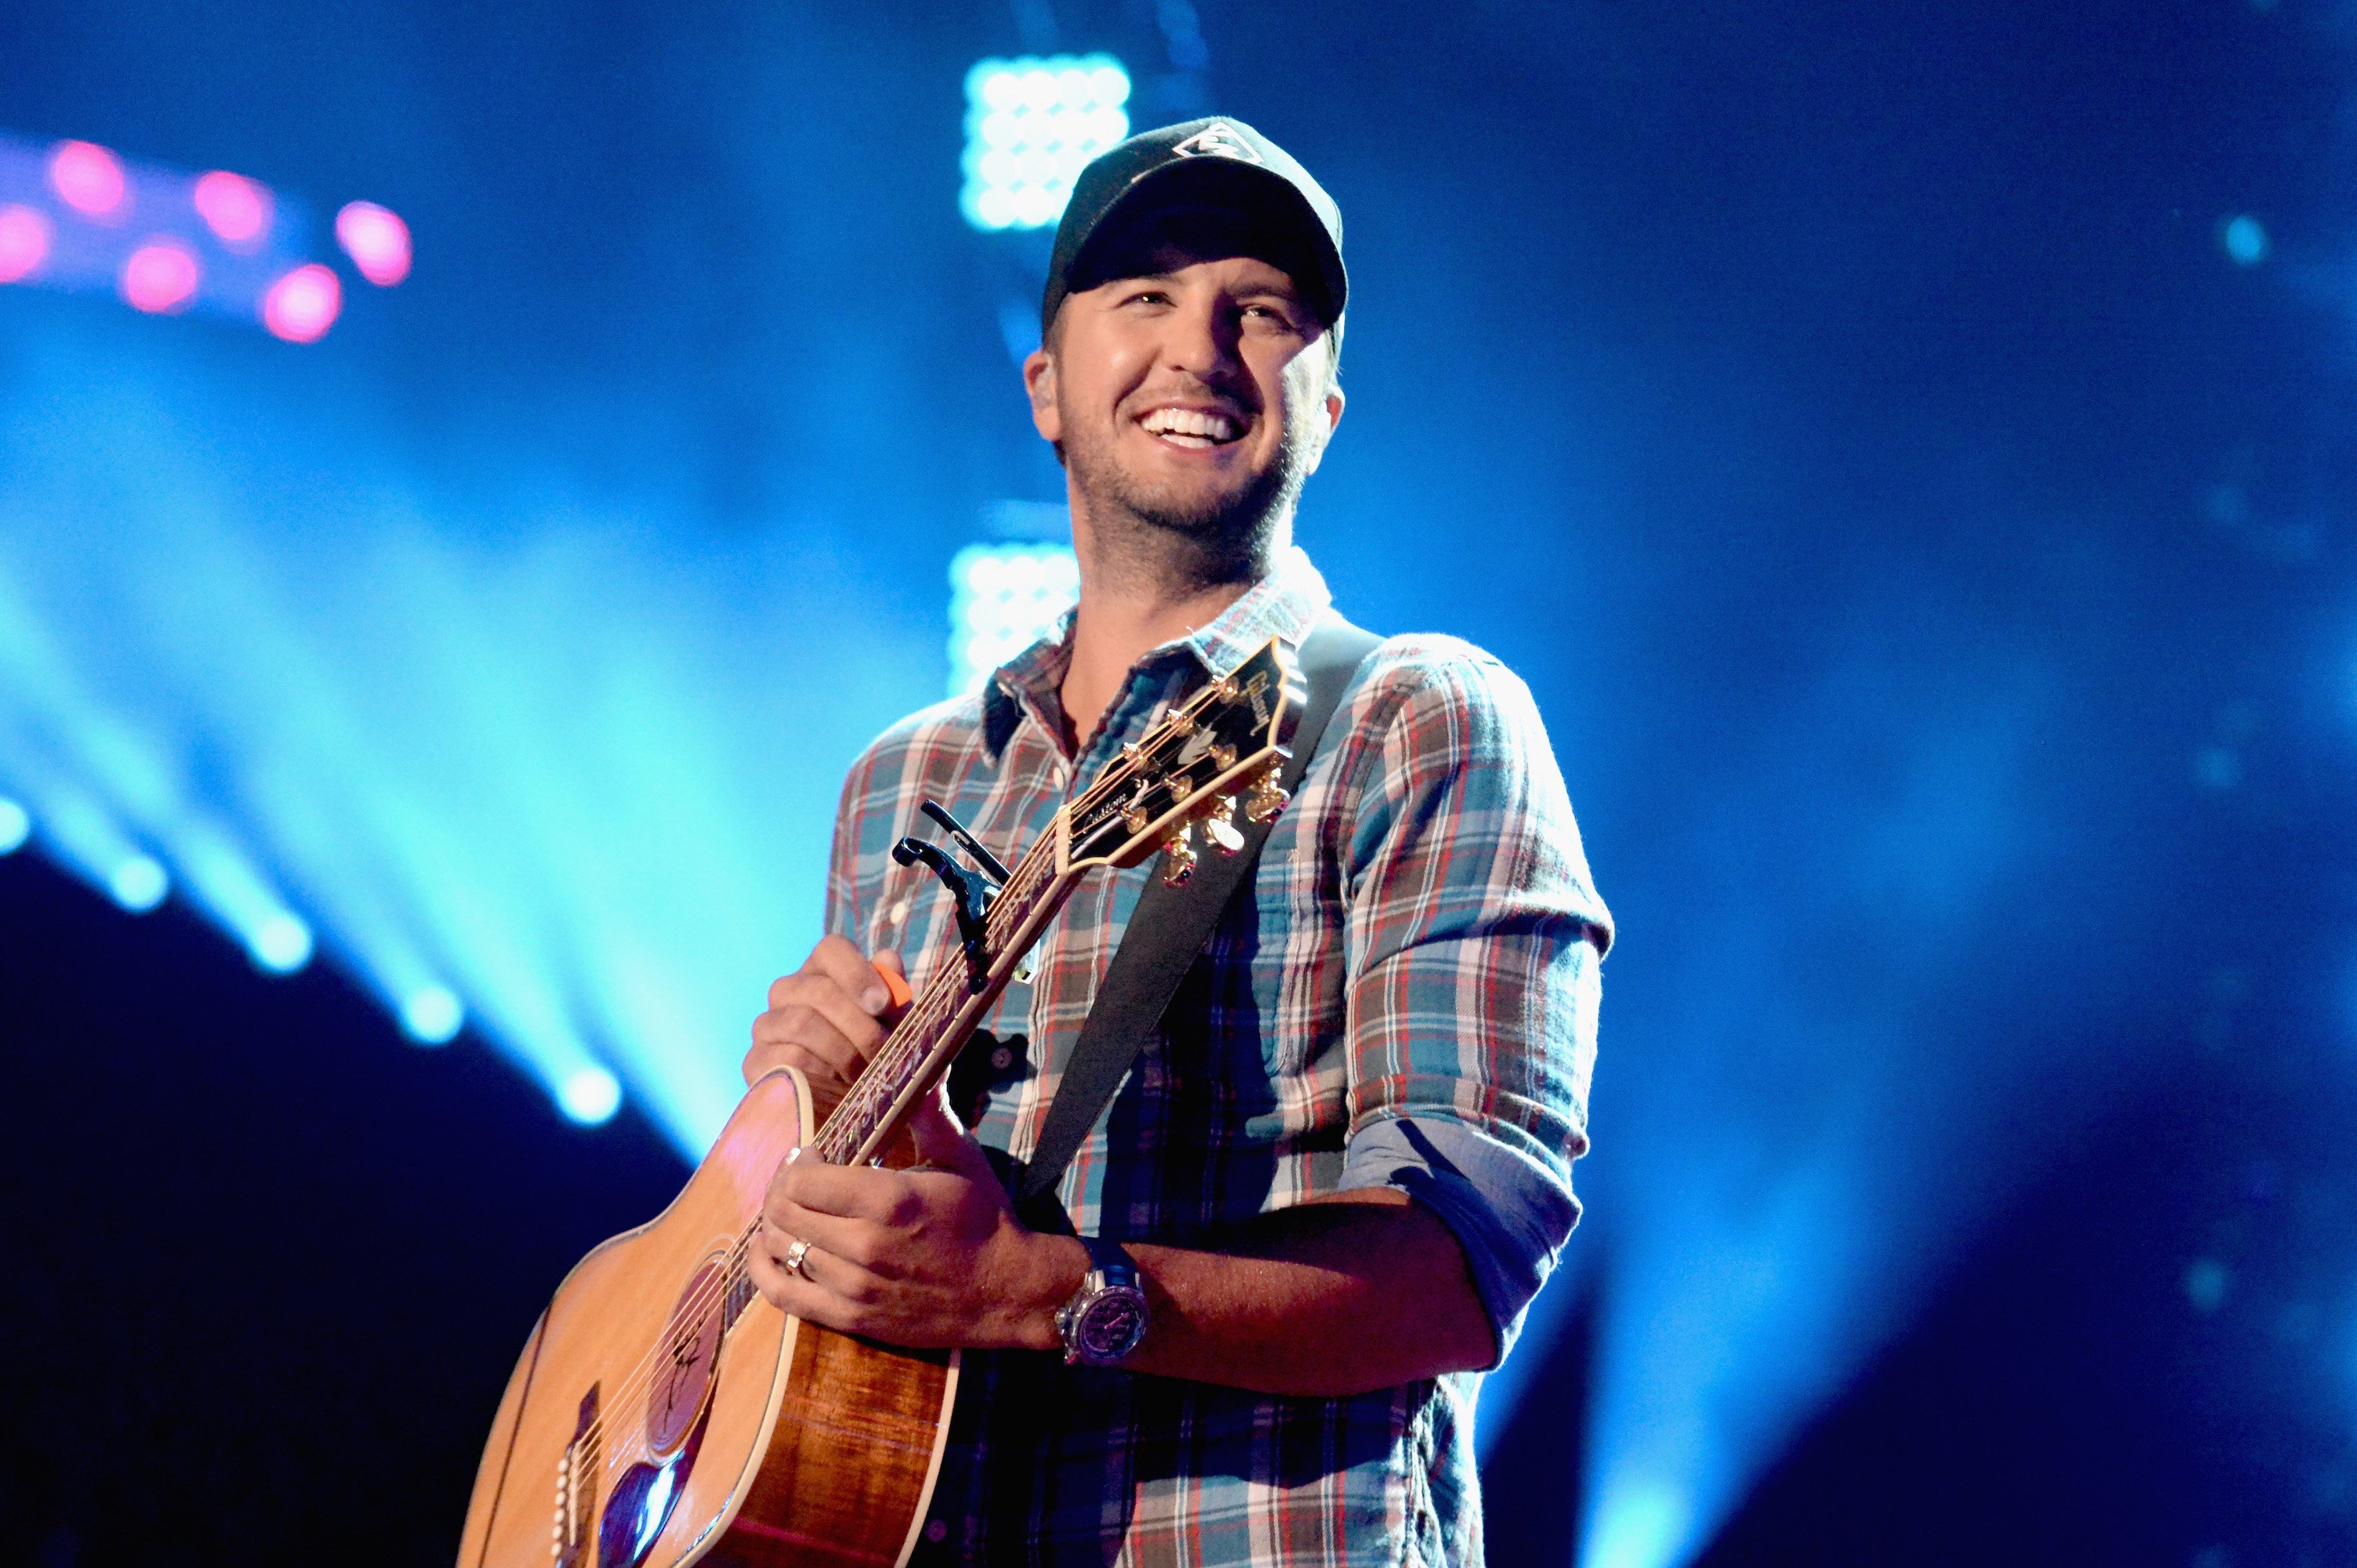 Luke Bryan onstage during the 2016 CMT Music awards